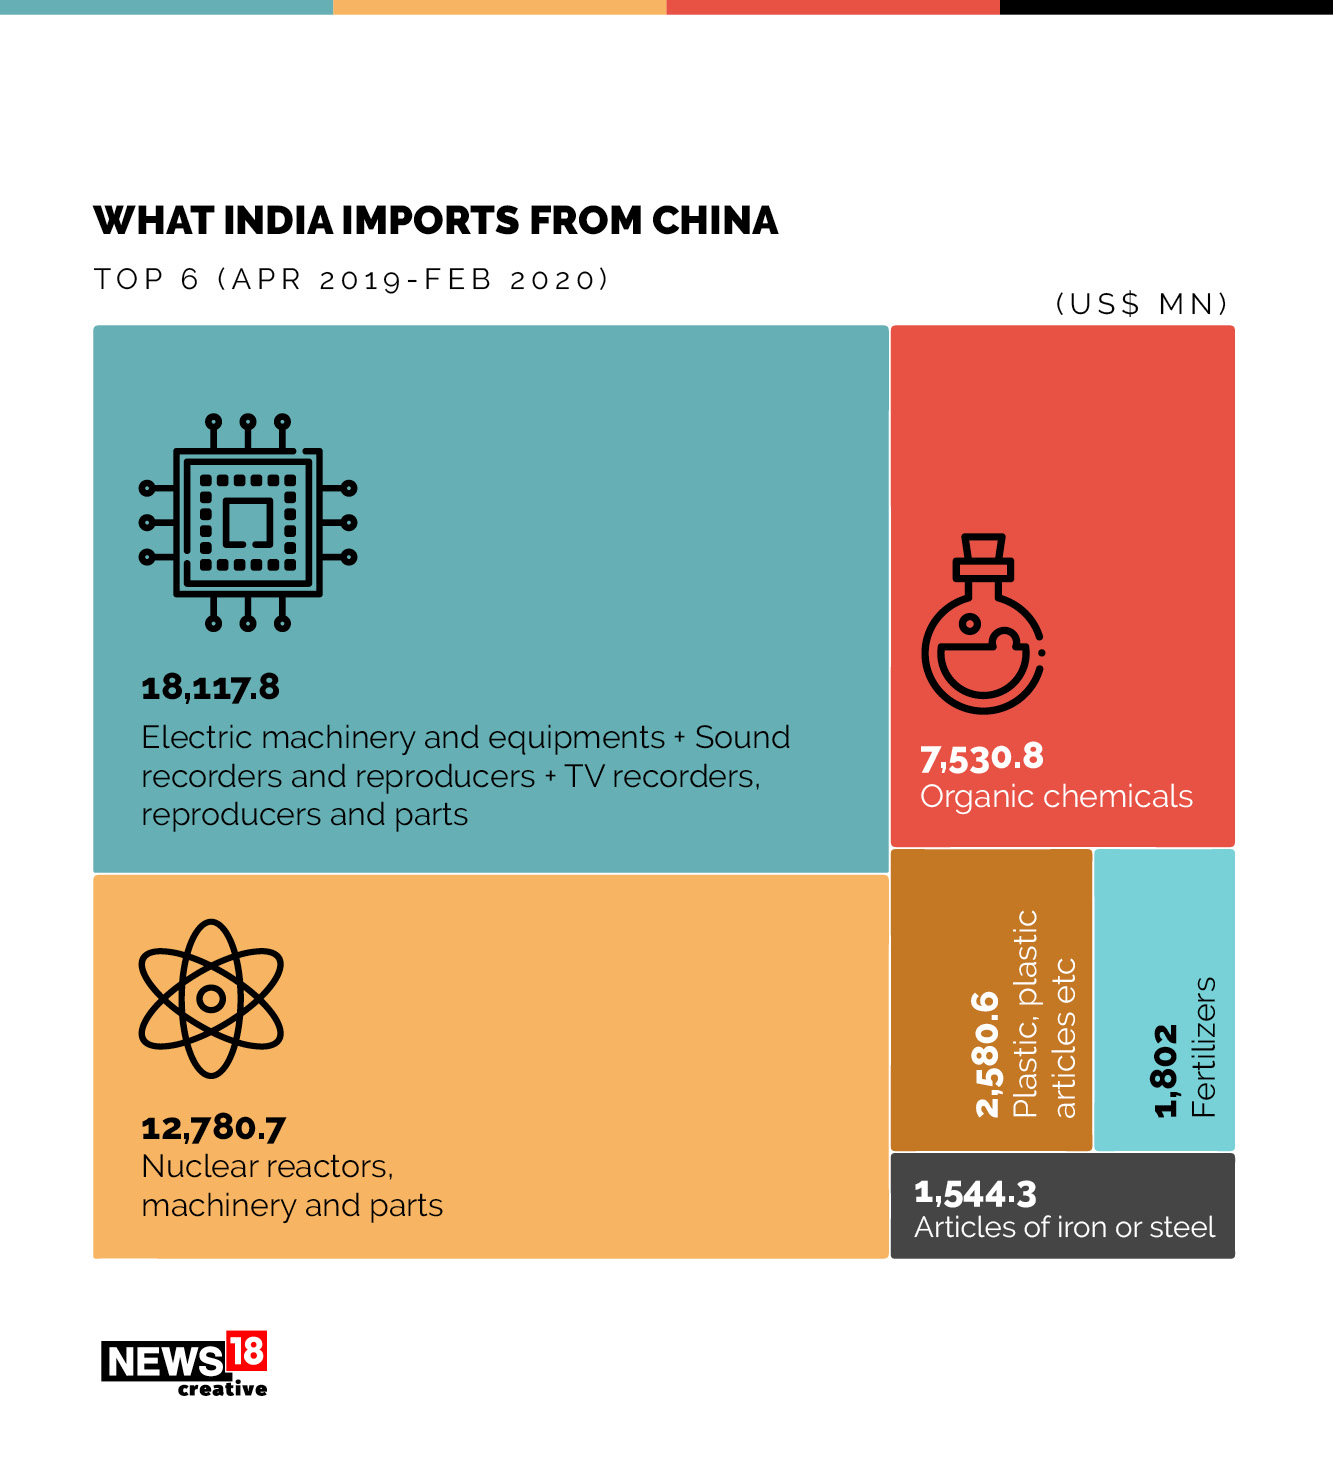 Items India Import from China 